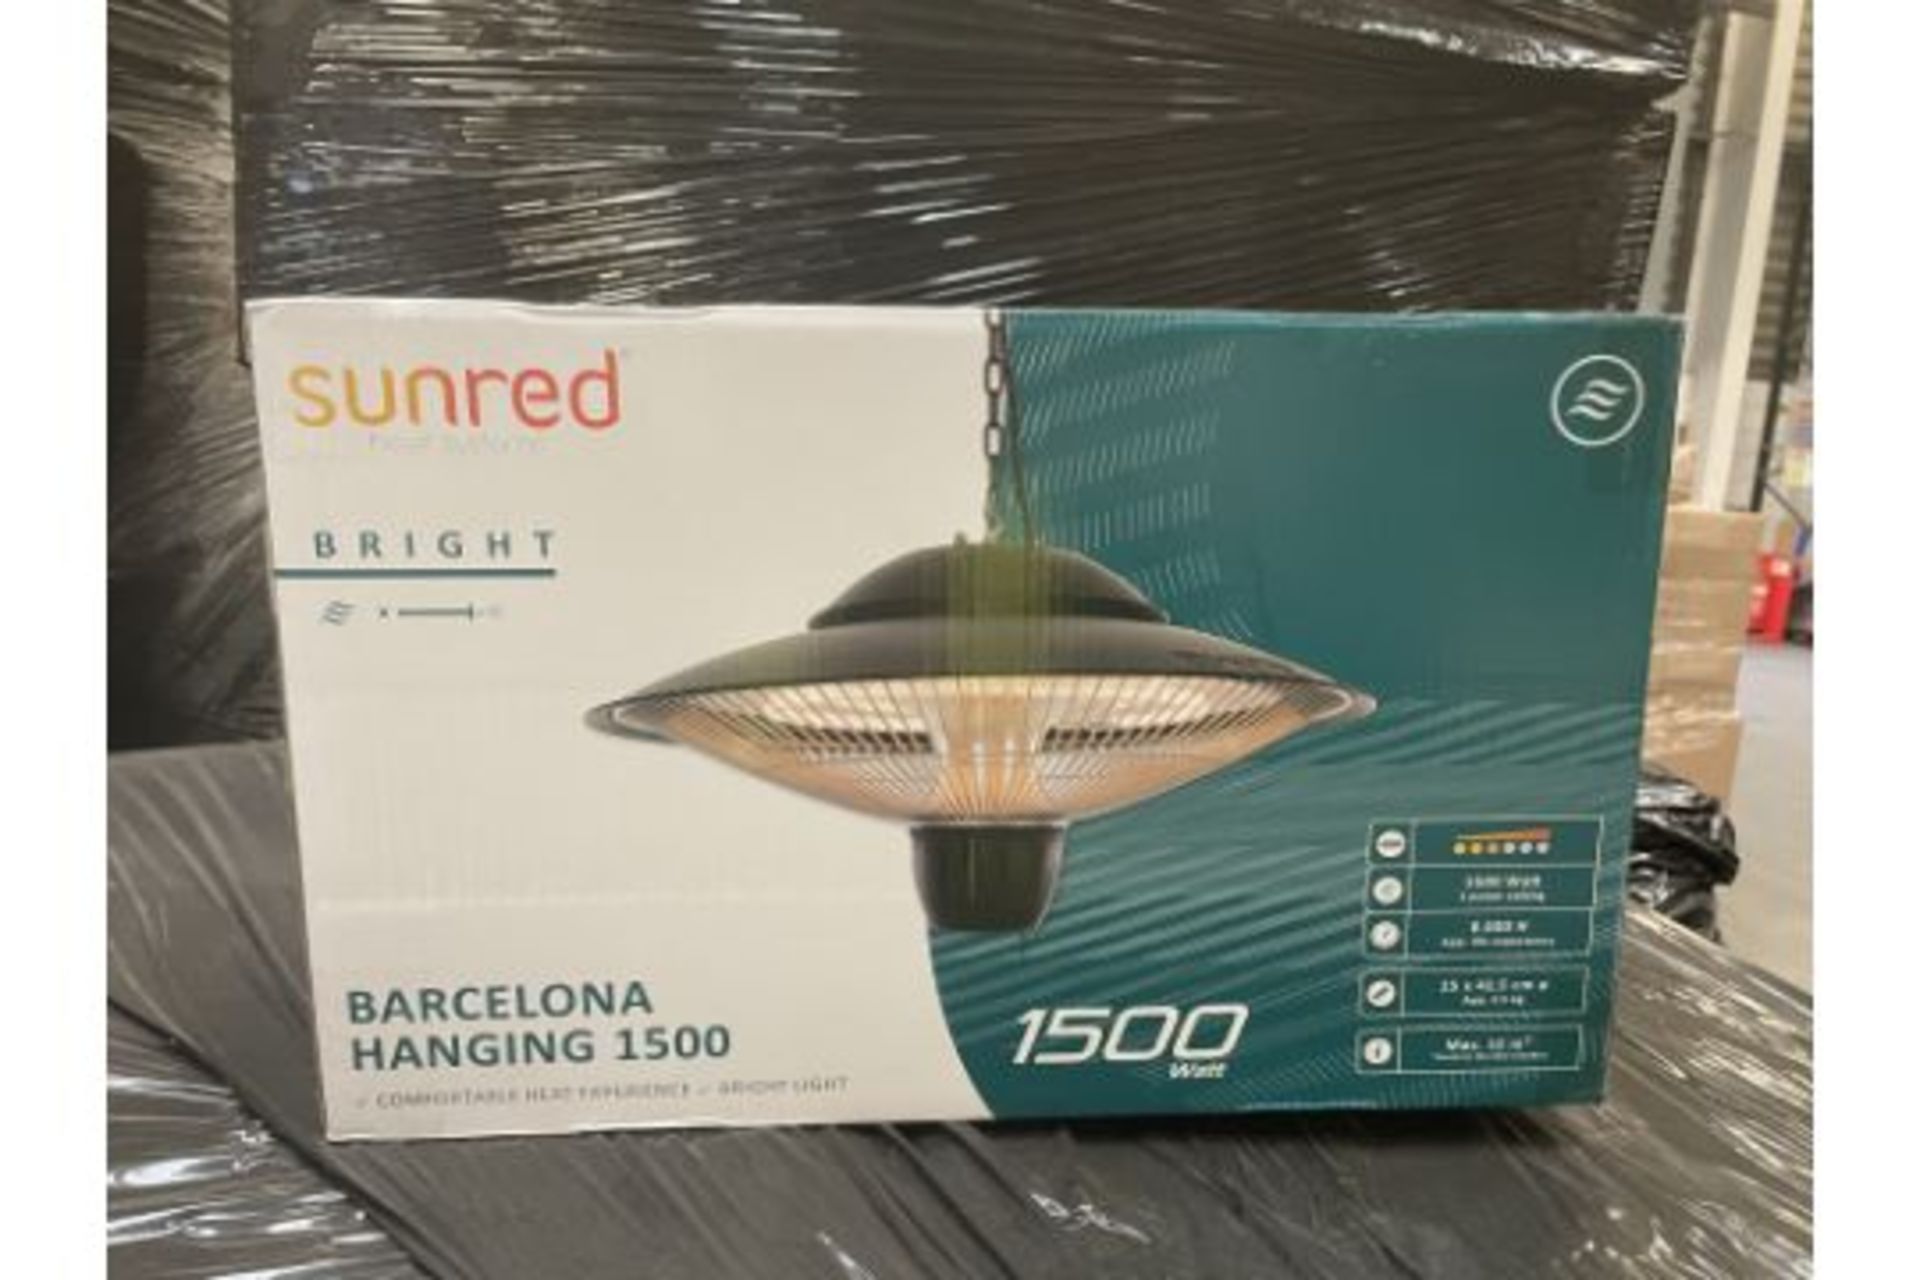 Brand New The Sunred Heater Barcelona Hanging 1500W RRP £299.A high quality and efficient outdoor - Image 2 of 3